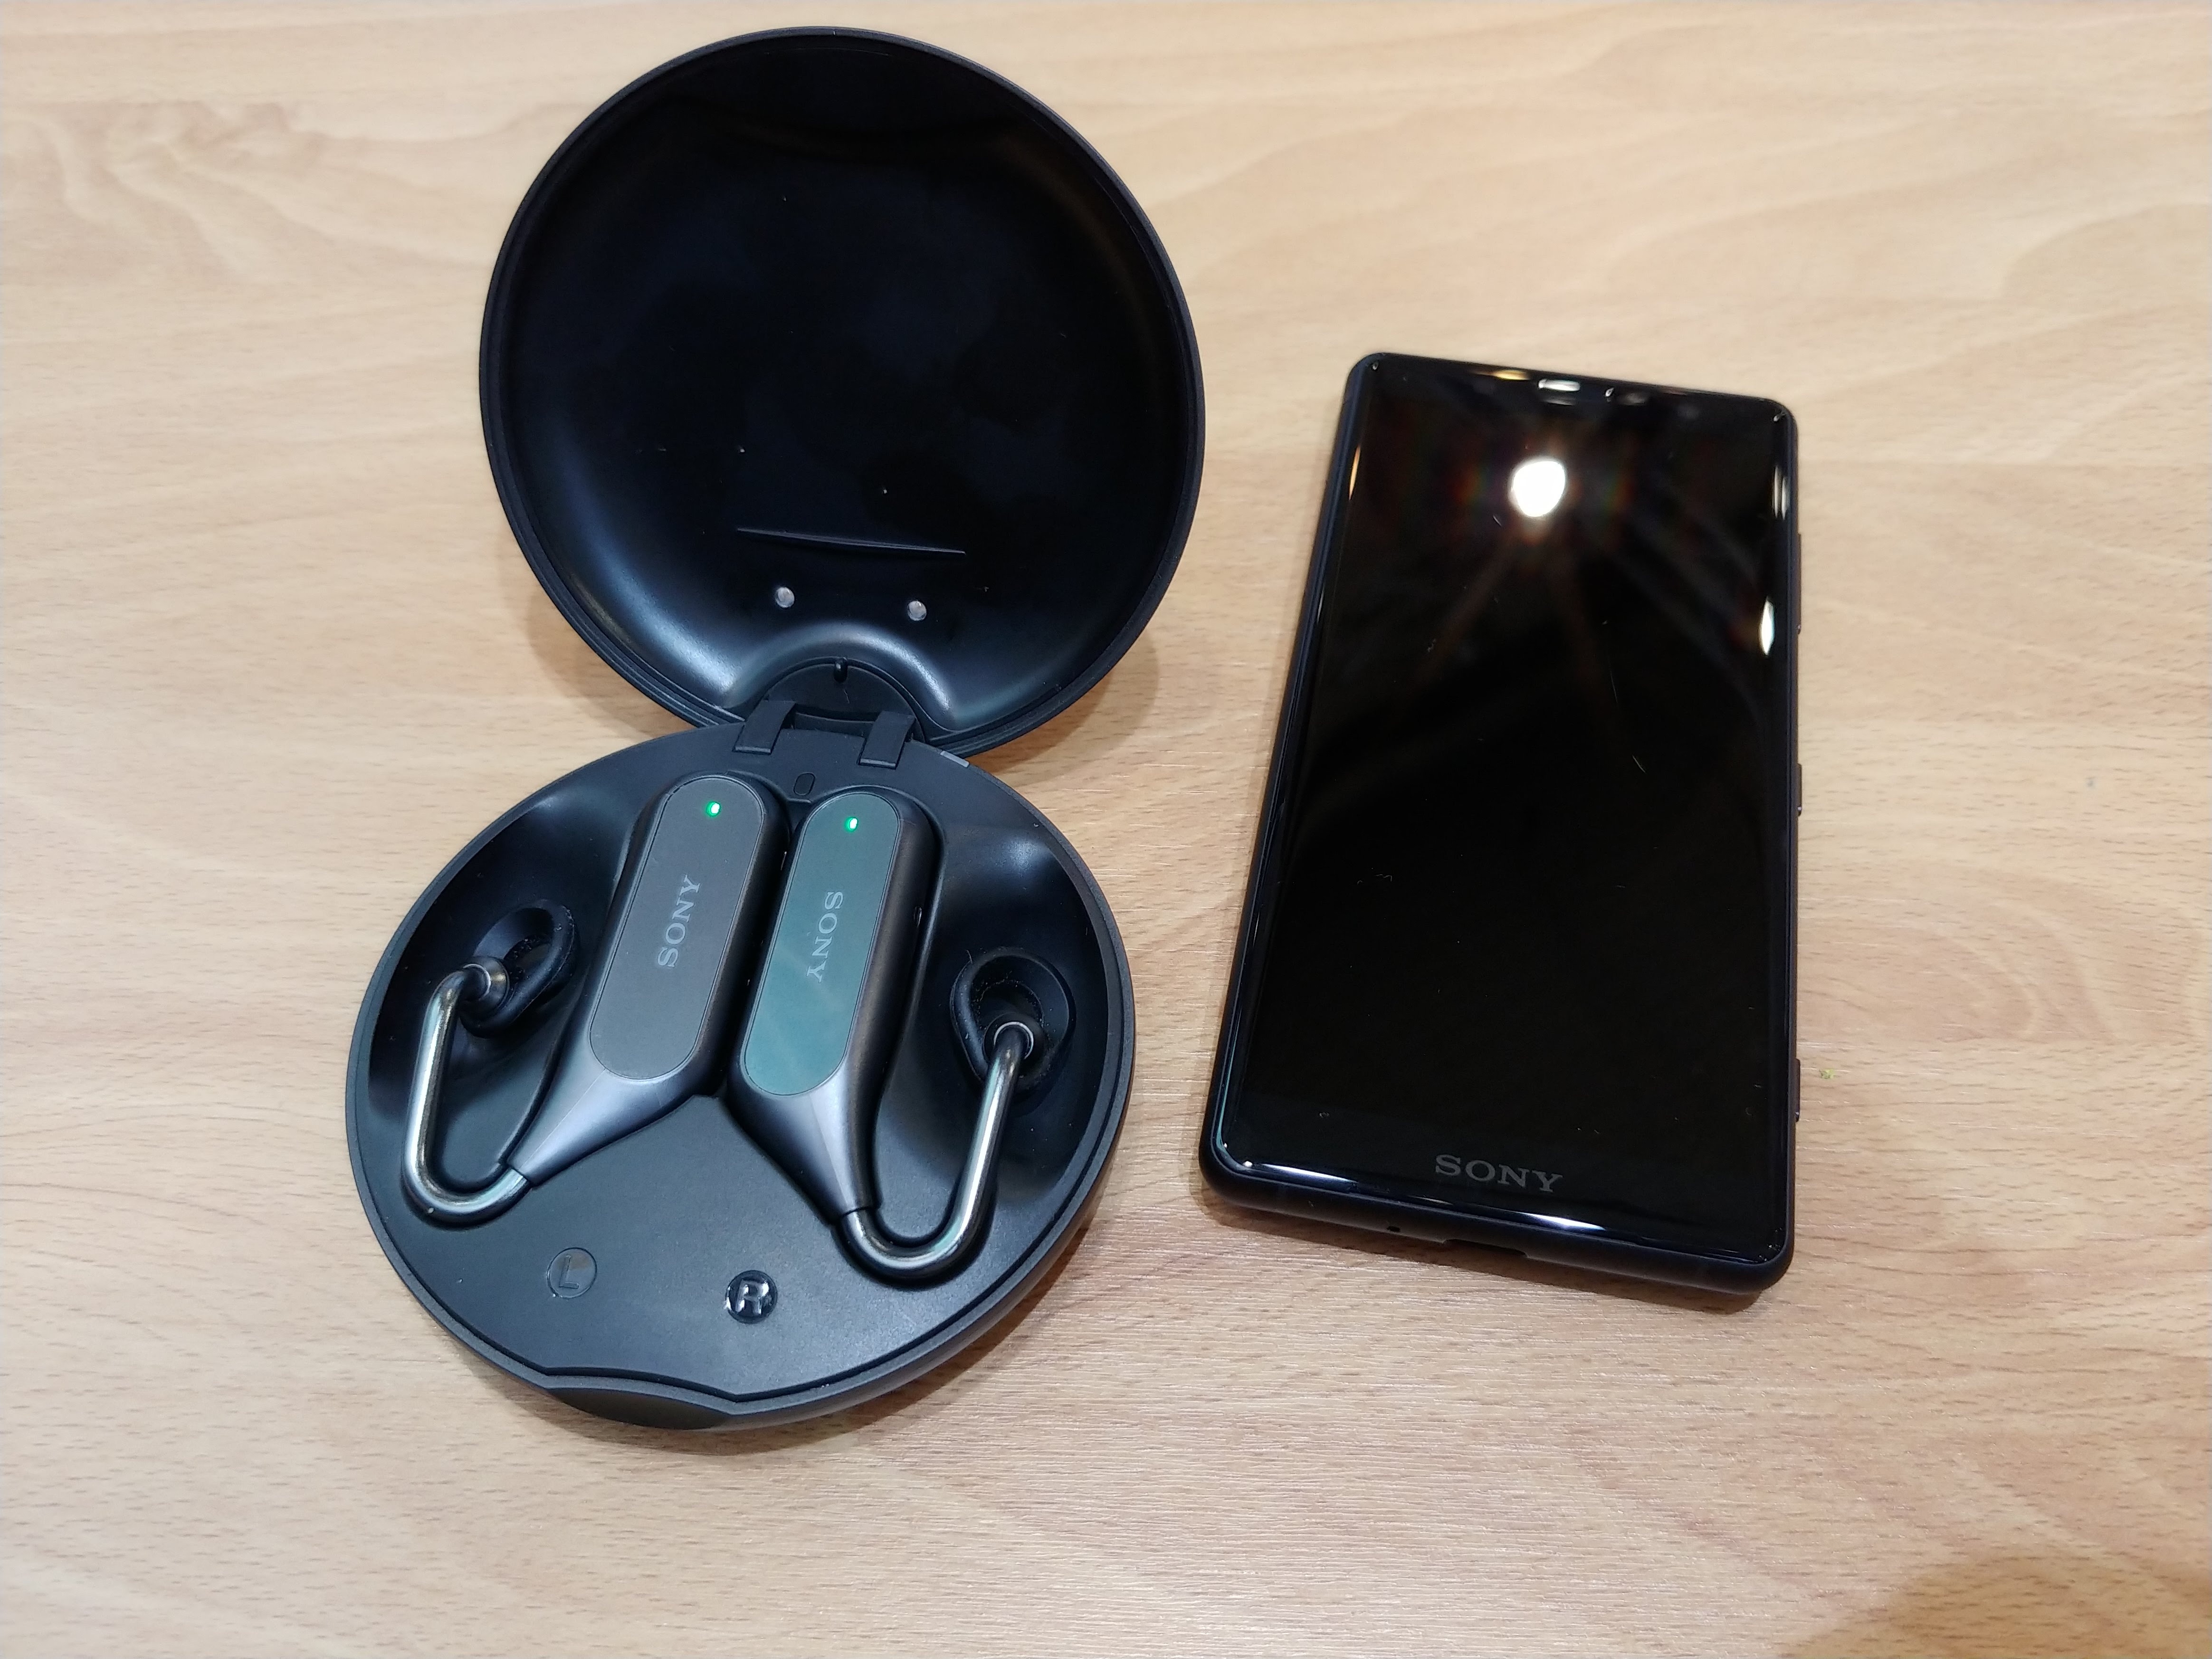 Smøre Vil have Mariner Sony's Open-Ear Xperia Ear Duo Wireless Headphones Due in May